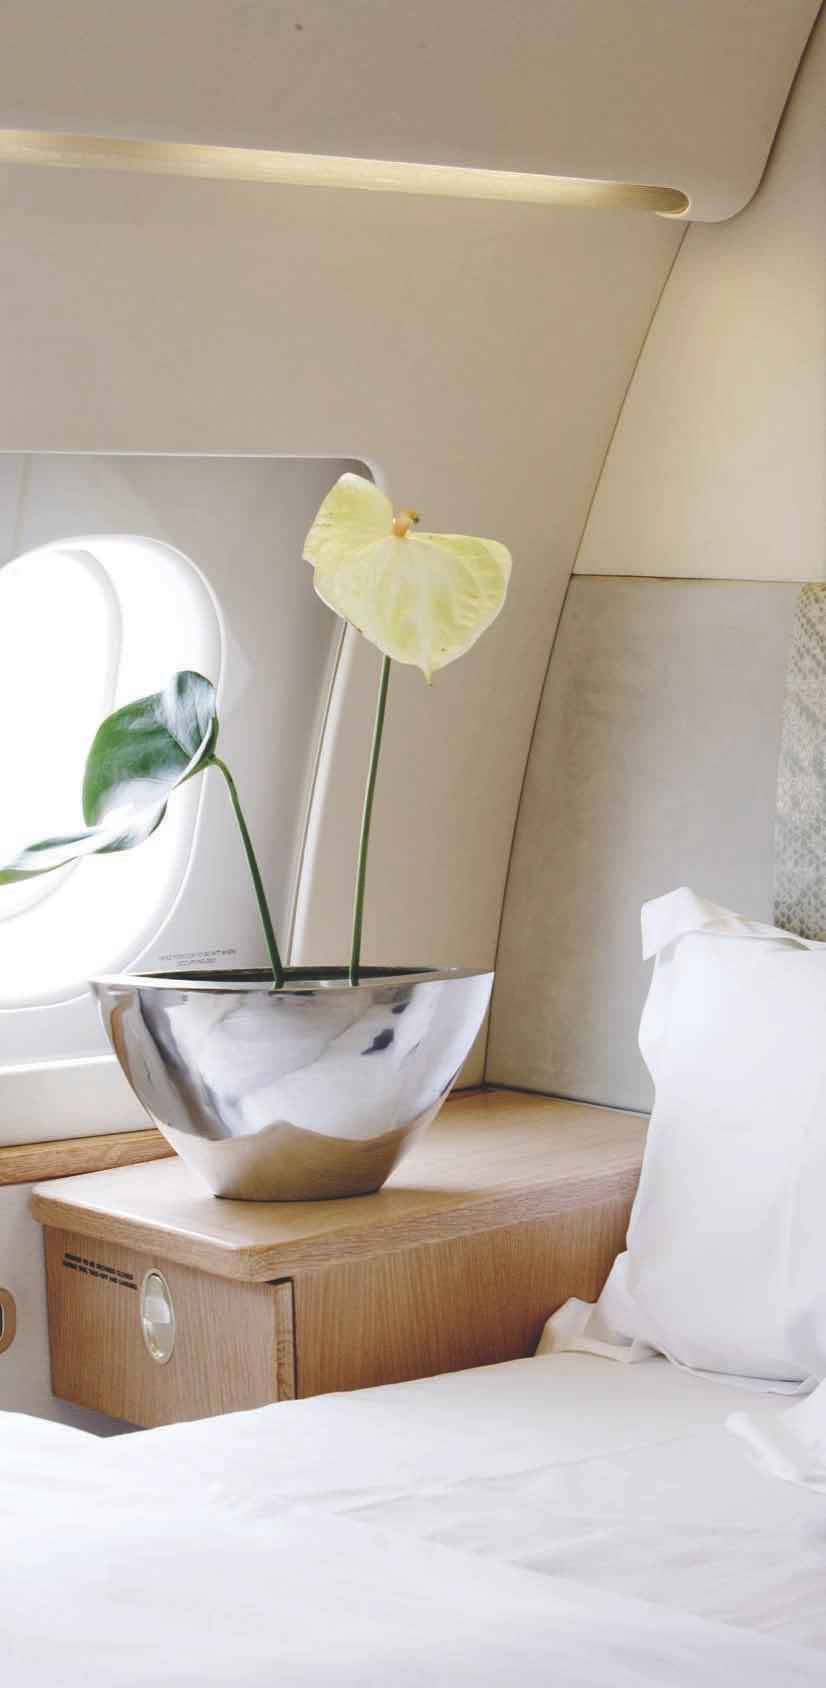 32 MAGAZINE The role has evolved over the past two years and now the Inflight Products and Services Manager looks after all the cabin accessories used onboard including linen, towels, beauty products